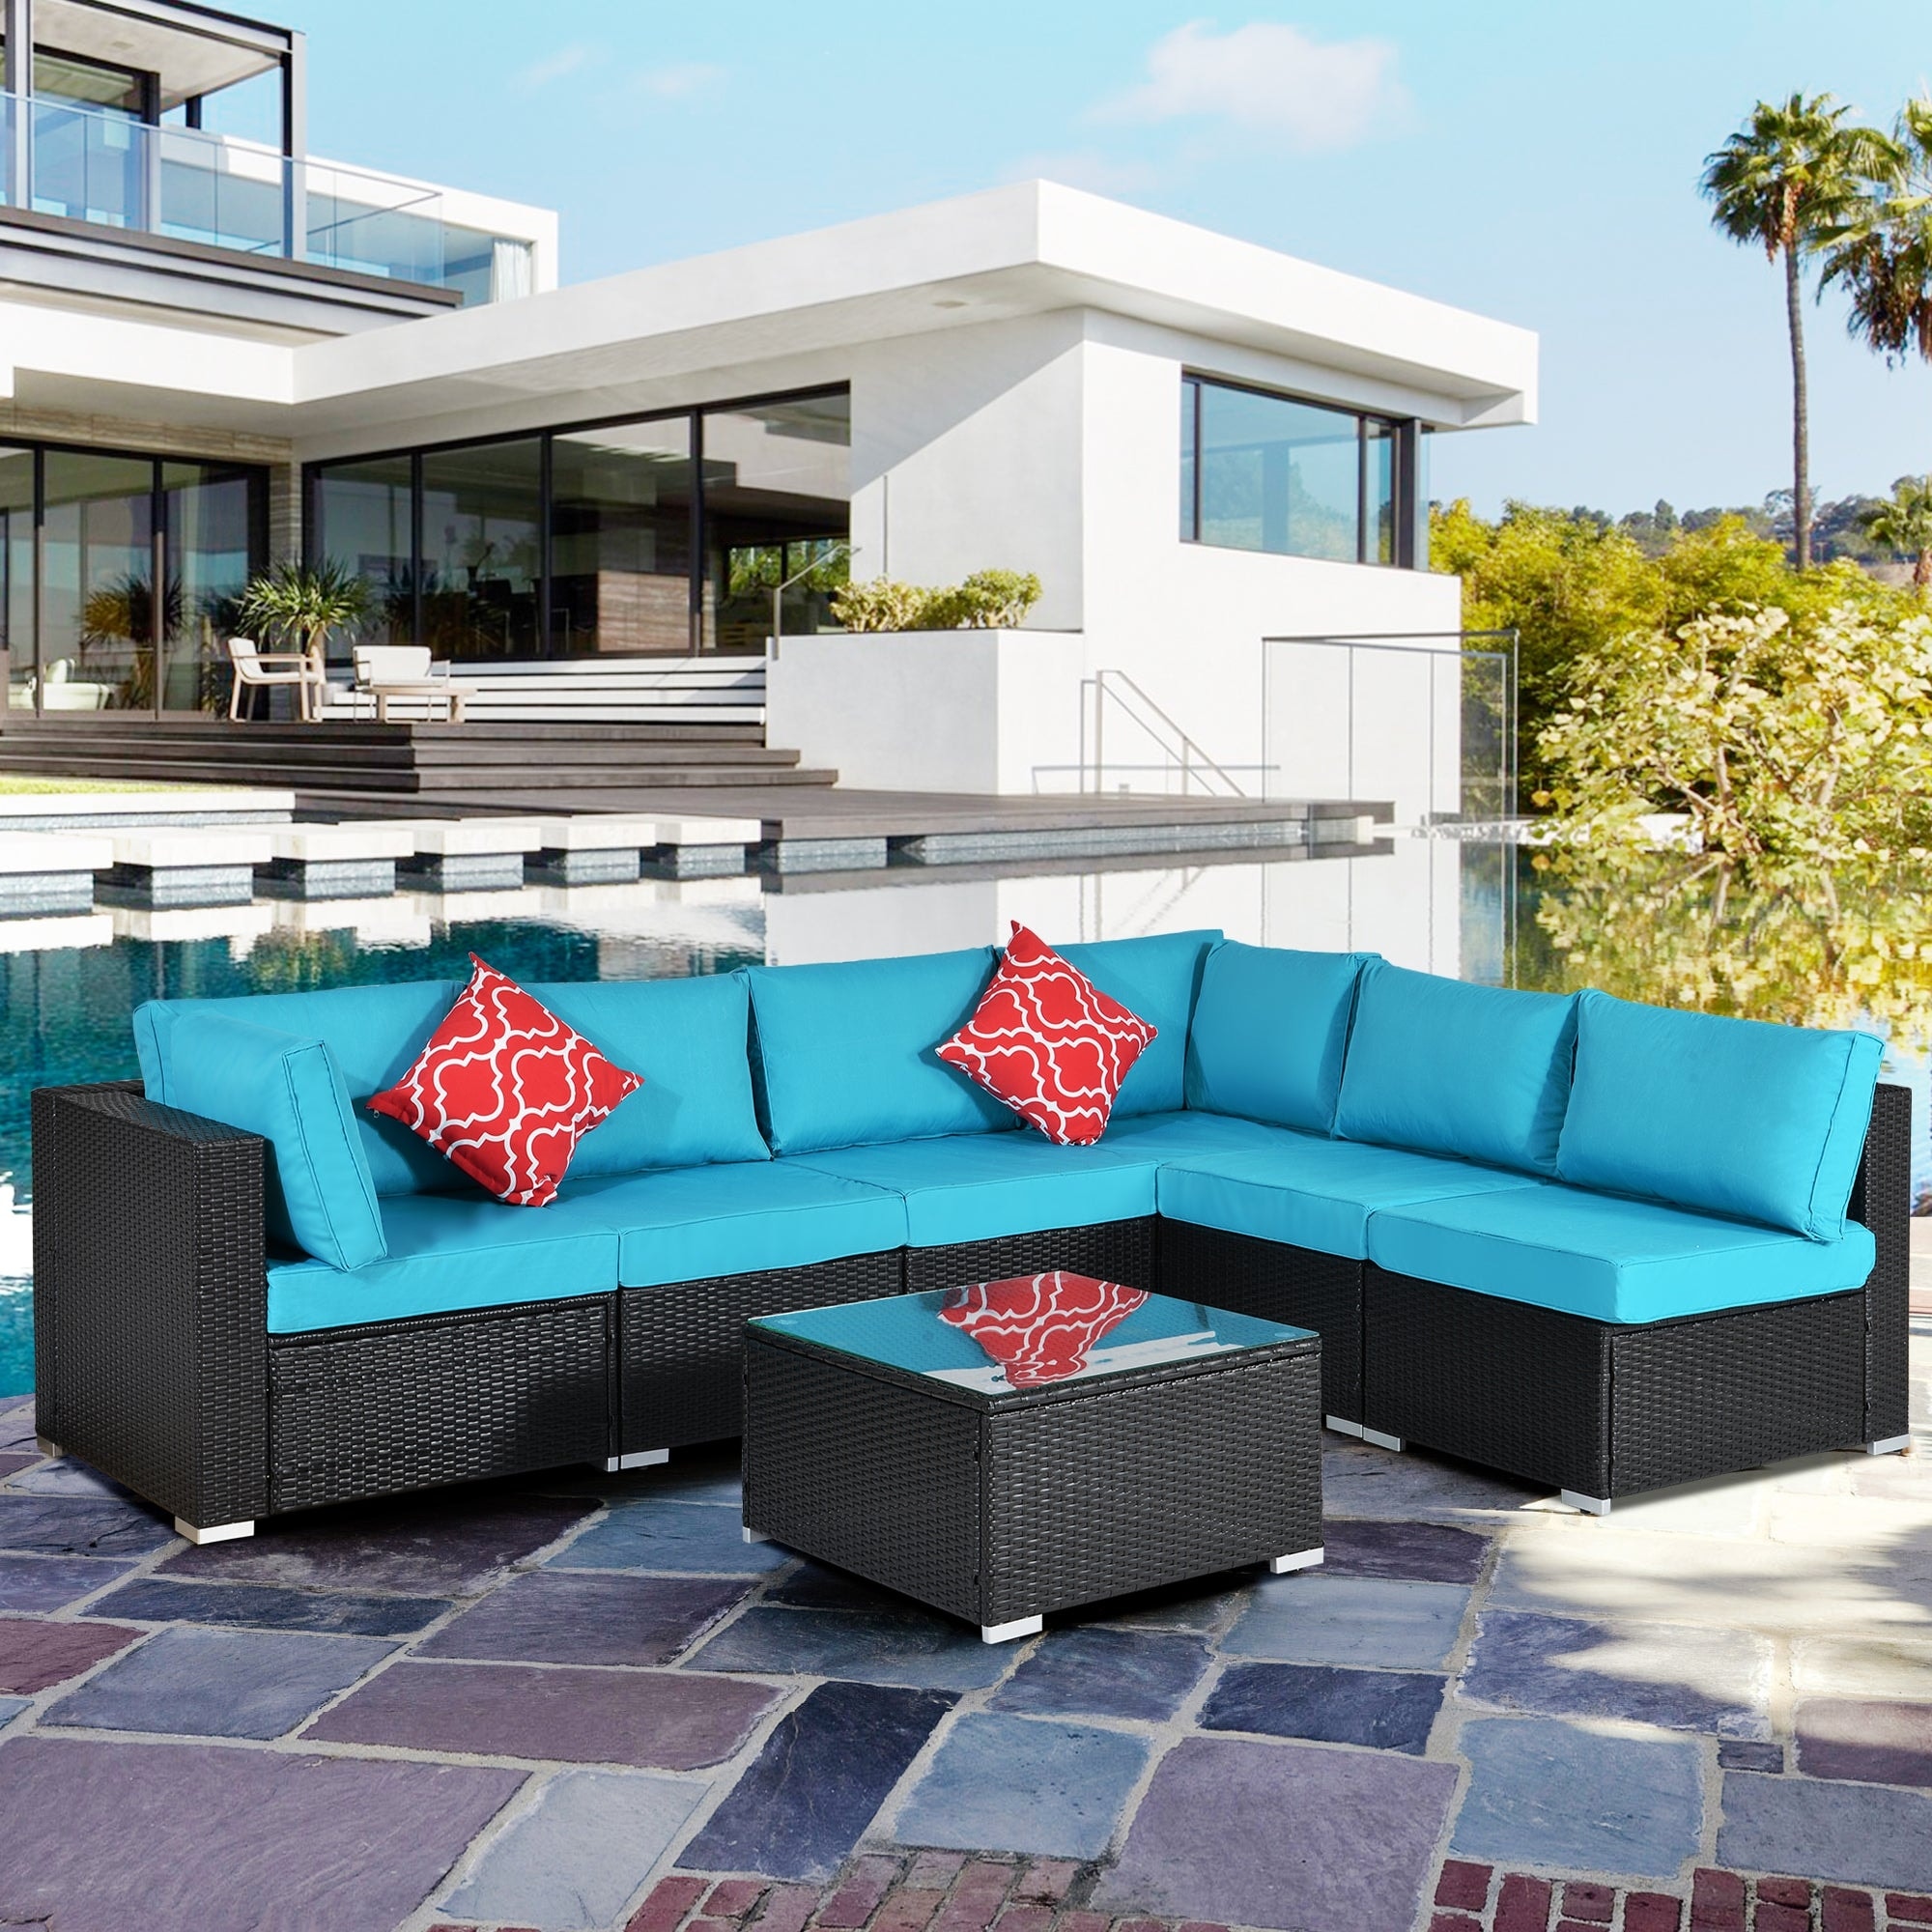 7 Pieces Outdoor Rattan Wicker Reversible Patio Sectional With Cushions